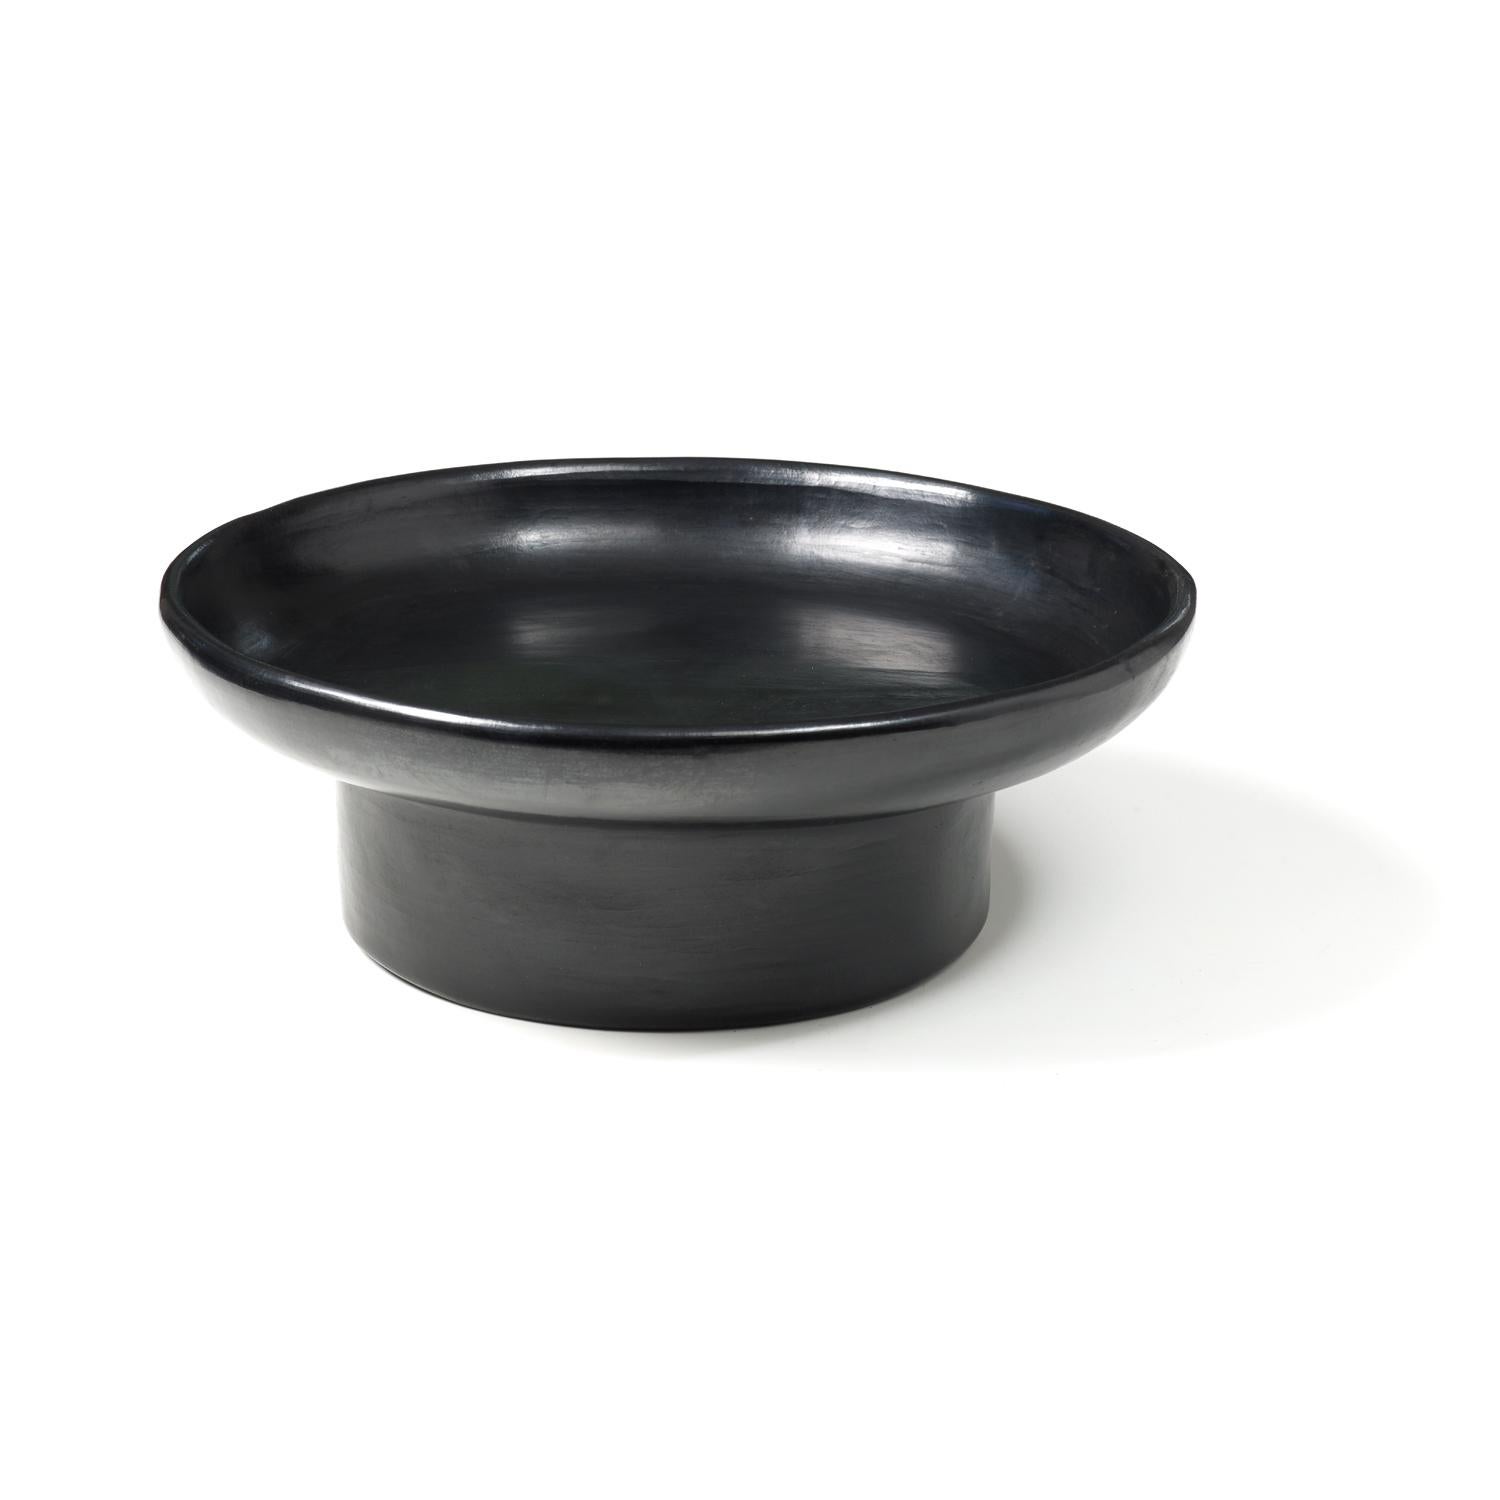 Large tray 2 by Sebastian Herkner
Materials: Heat-resistant black ceramic. 
Technique: Glazed. Oven cooked and polished with semi-precious stones. 
Dimensions: Diameter 44 cm x H 15 cm 
Available in sizes Small and Mini.

This pot belongs to